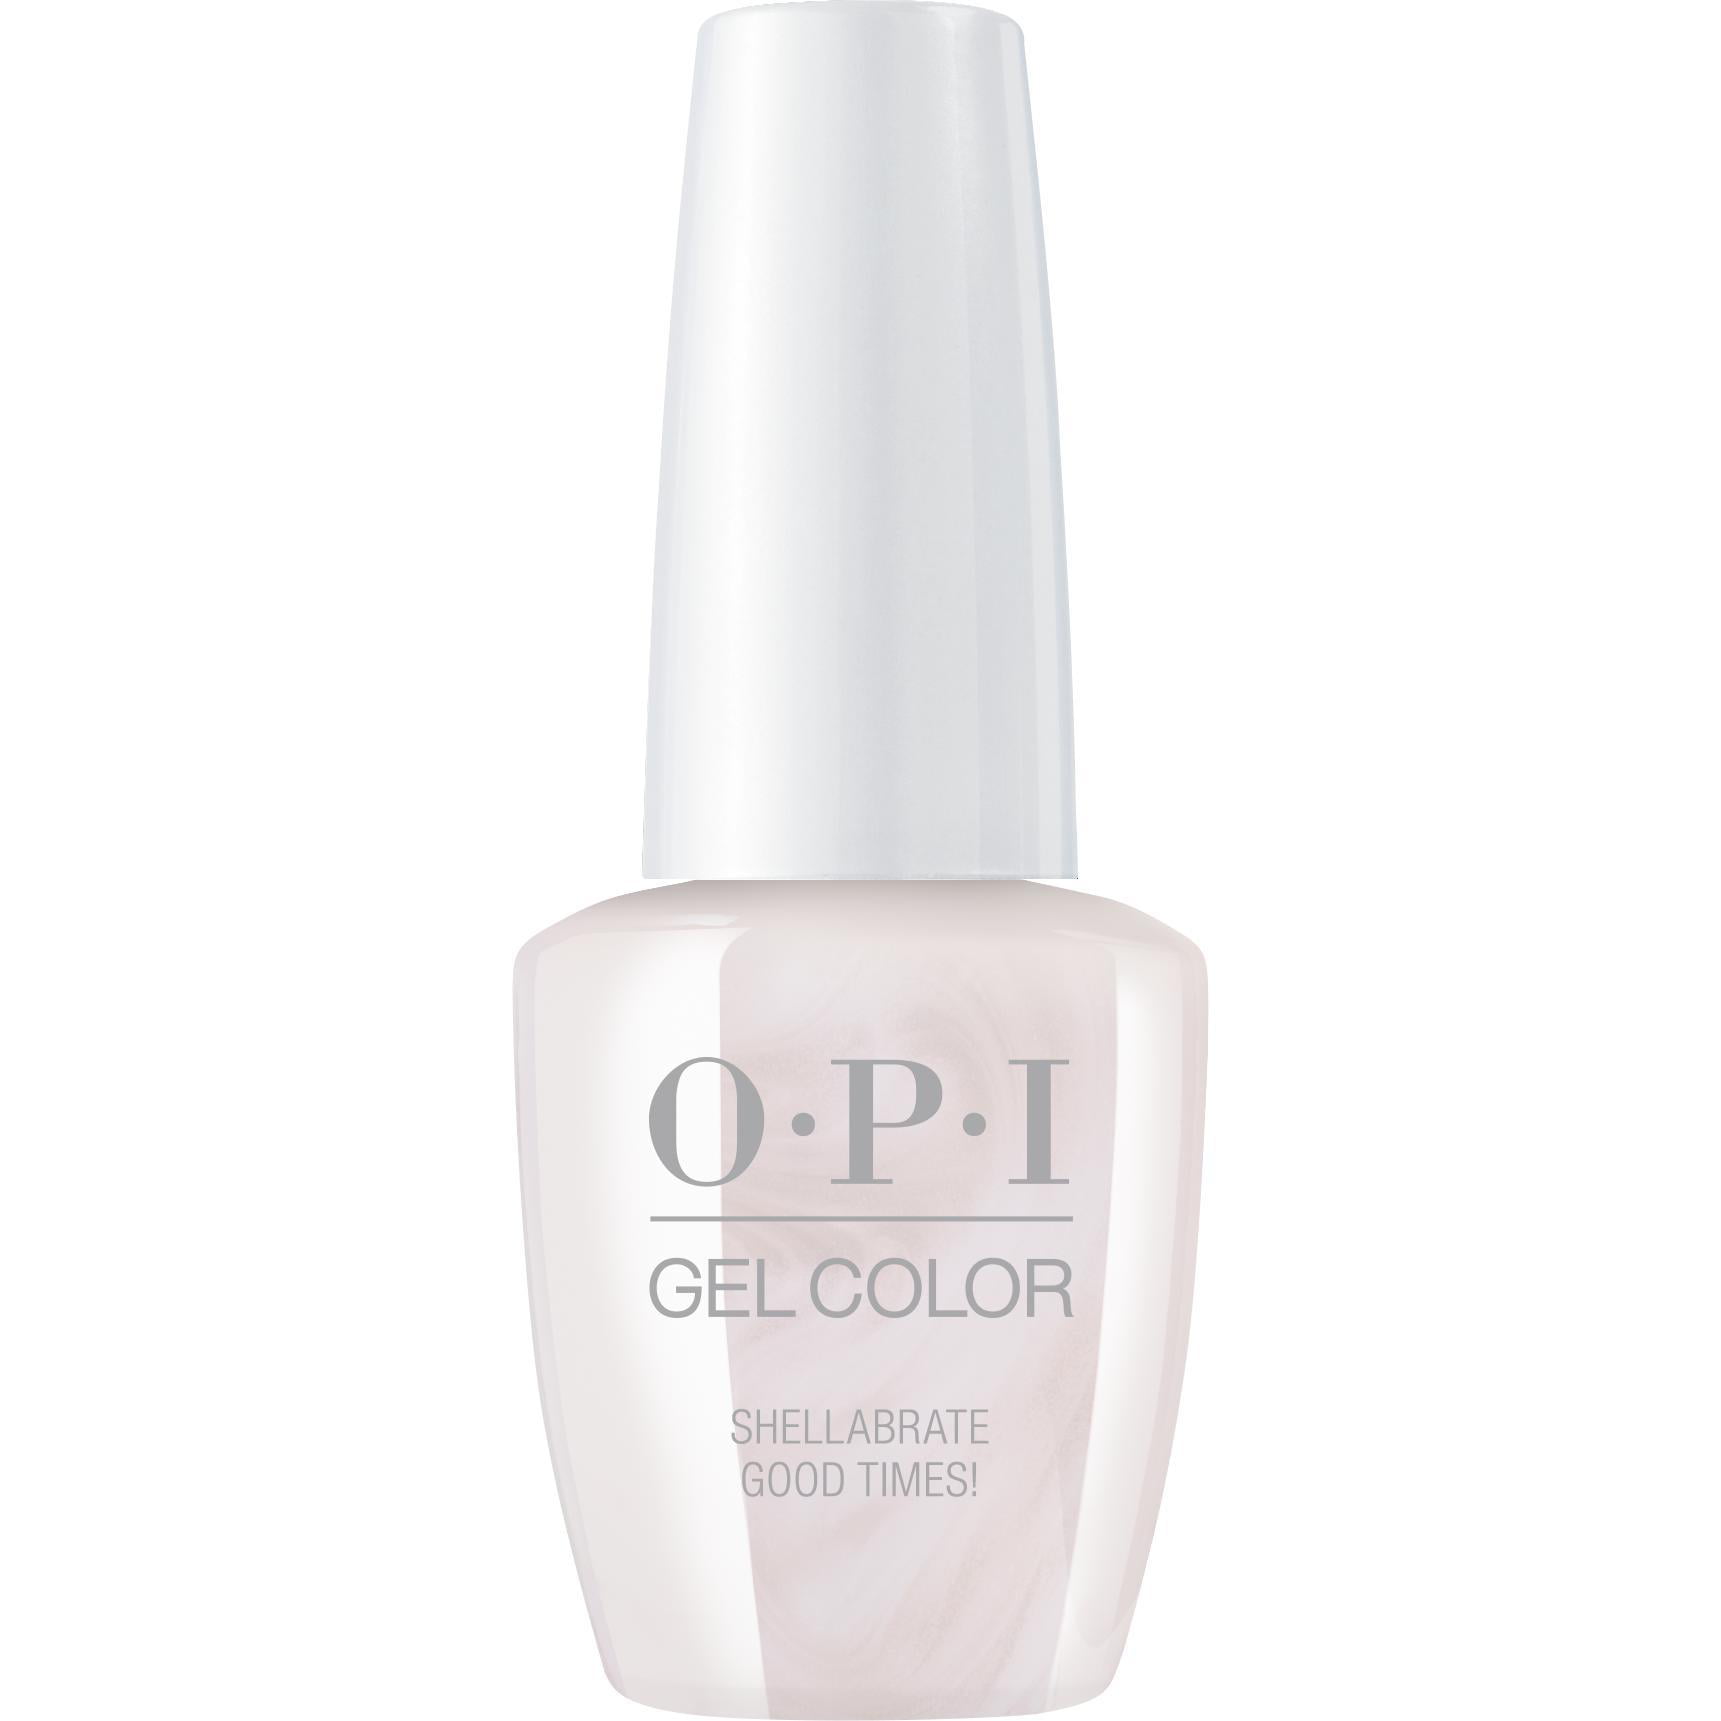 OPI Nail GELCOLOR Gel Color .5oz/15mL - Neo-Pearl - SHELLABRATE GOOD ...